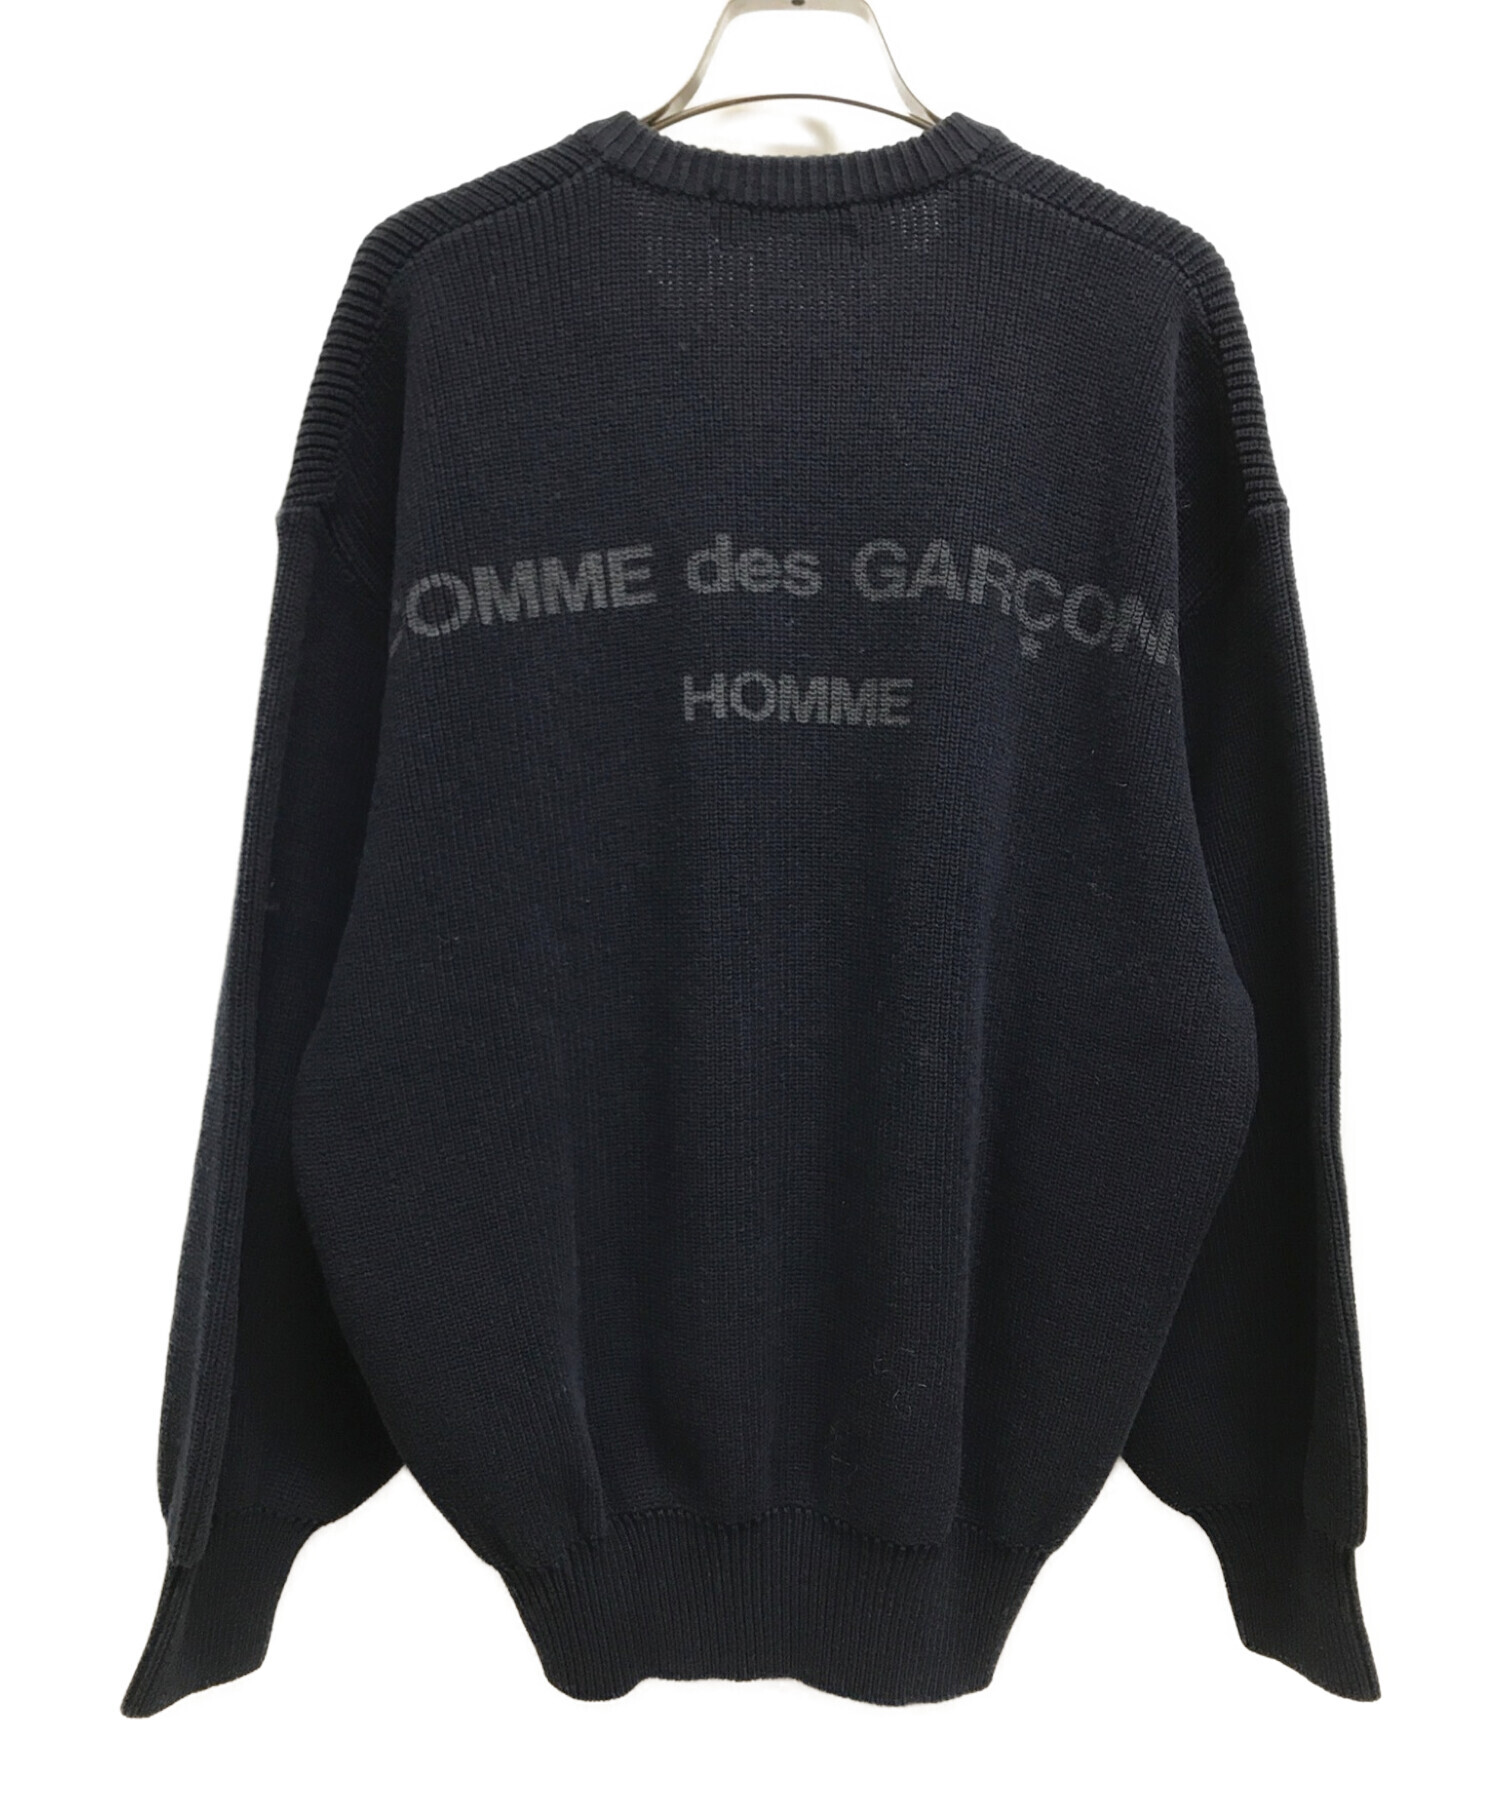 COMME des GARCONS HOMME セーター個性